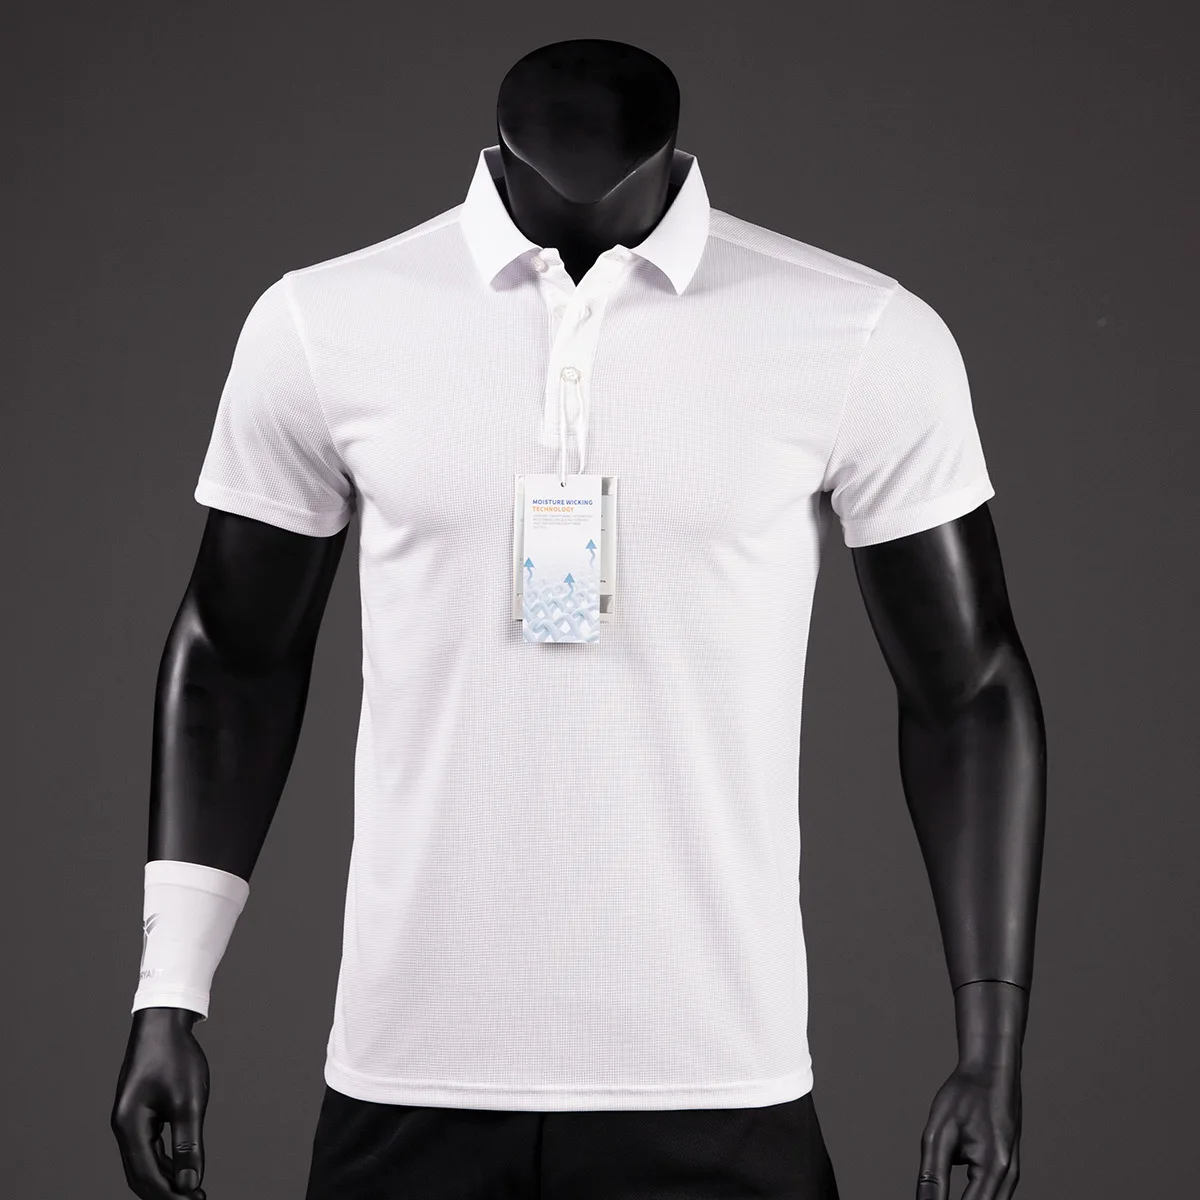 Men's Golf Shirt Luxury Functional Polo Shirt Quick-drying Perspiration Breathable Lapel Short-sleeved T-shirt for Man Summer 7